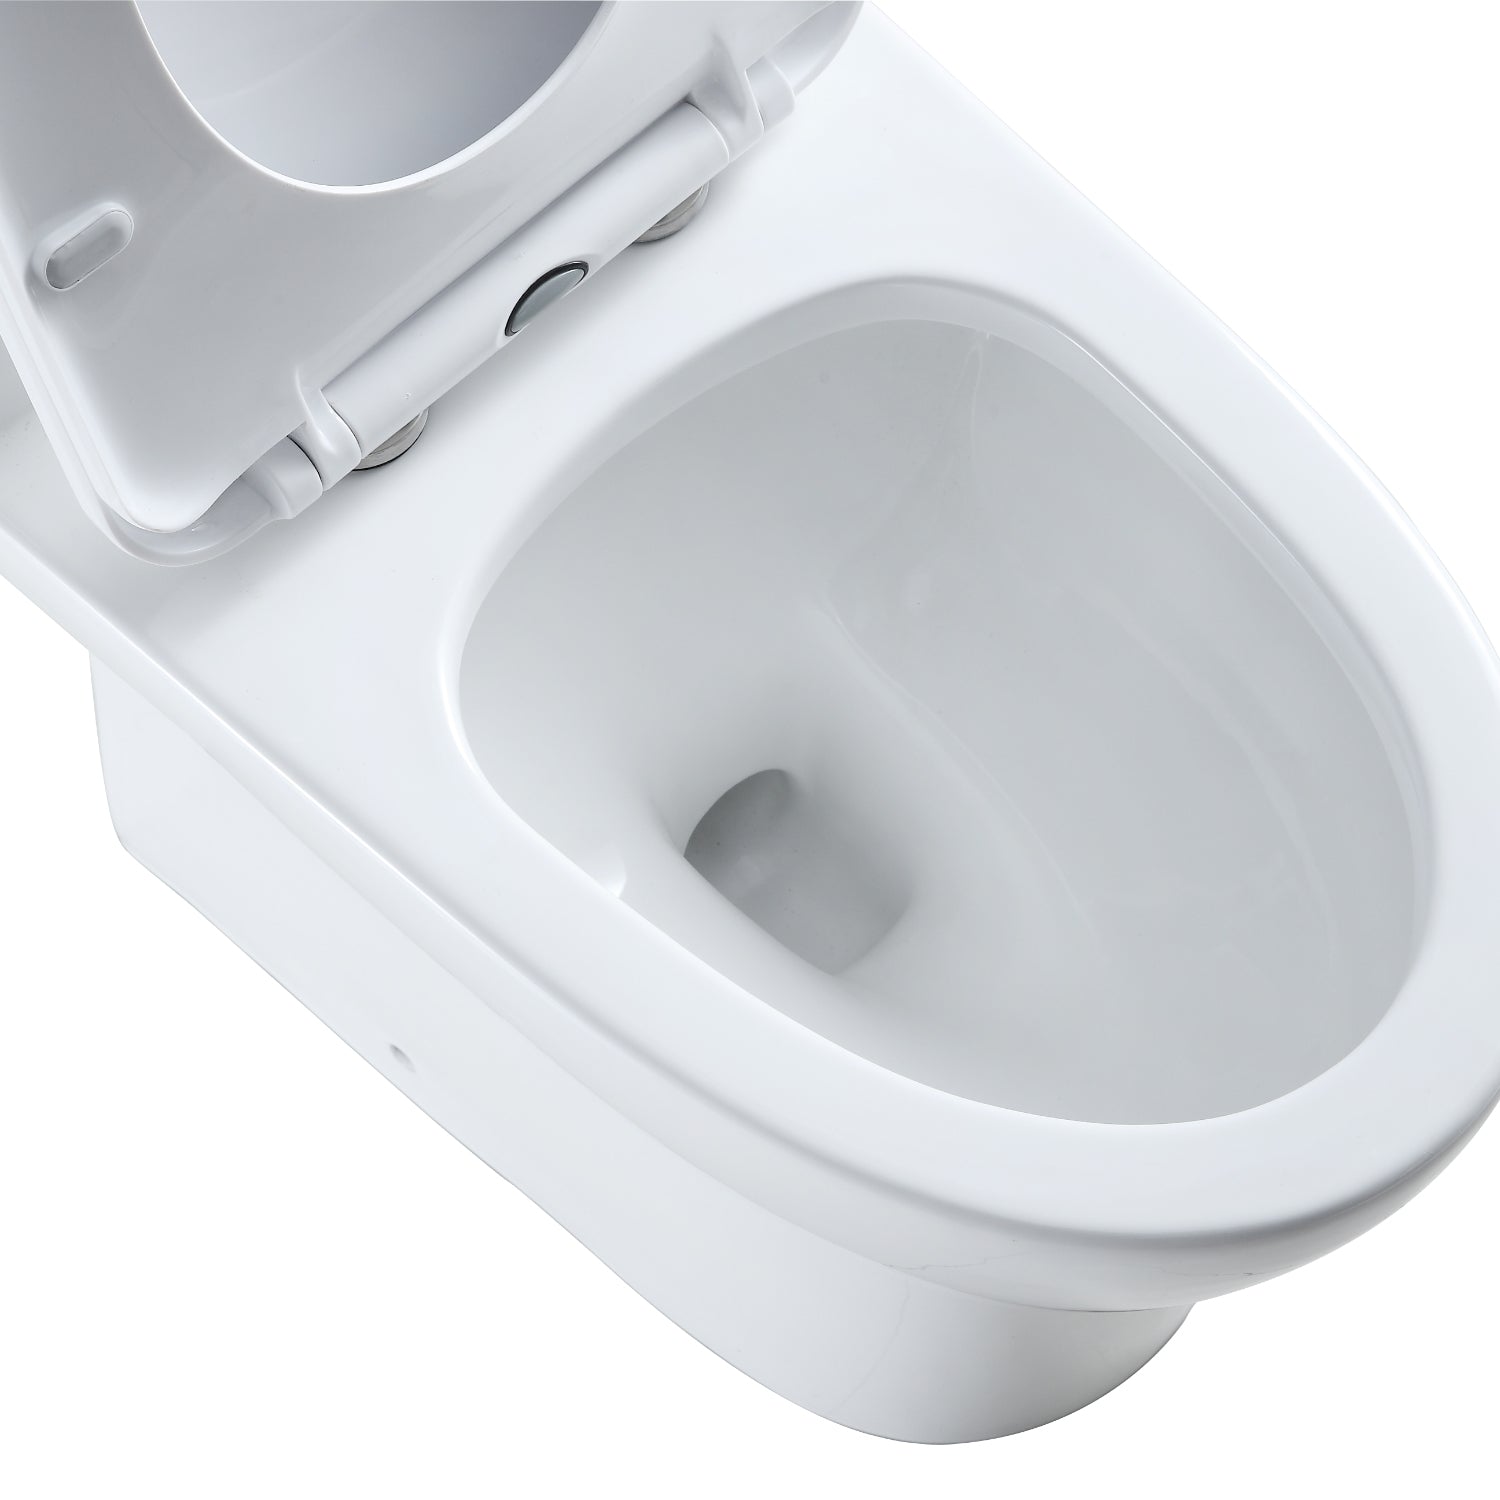 Verona Dual Flush Elongated One-Piece Toilet (Seat Included)